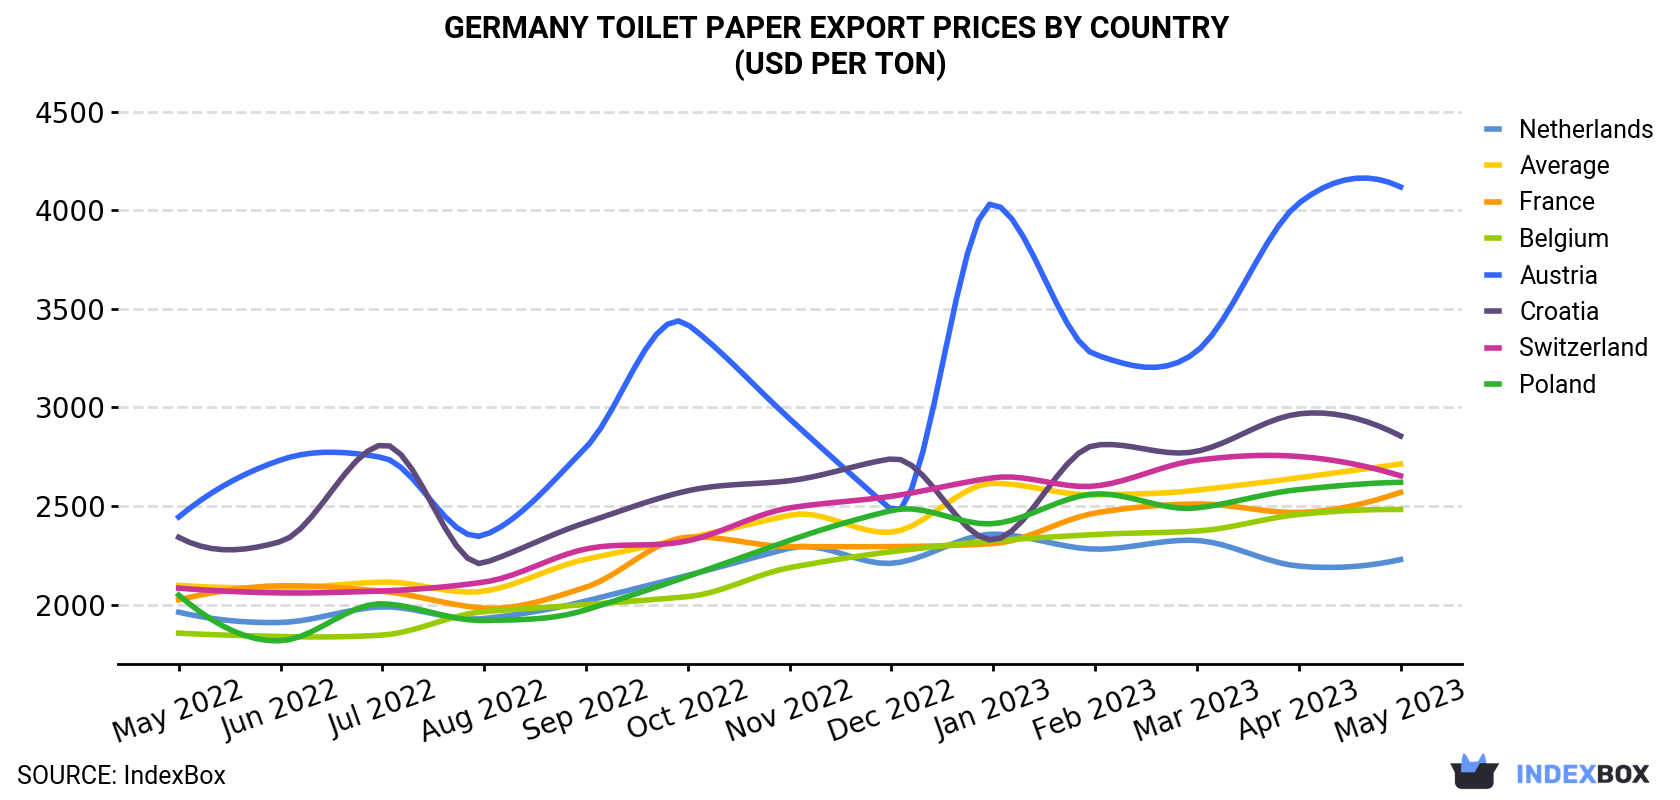 Germany Toilet Paper Export Prices By Country (USD Per Ton)